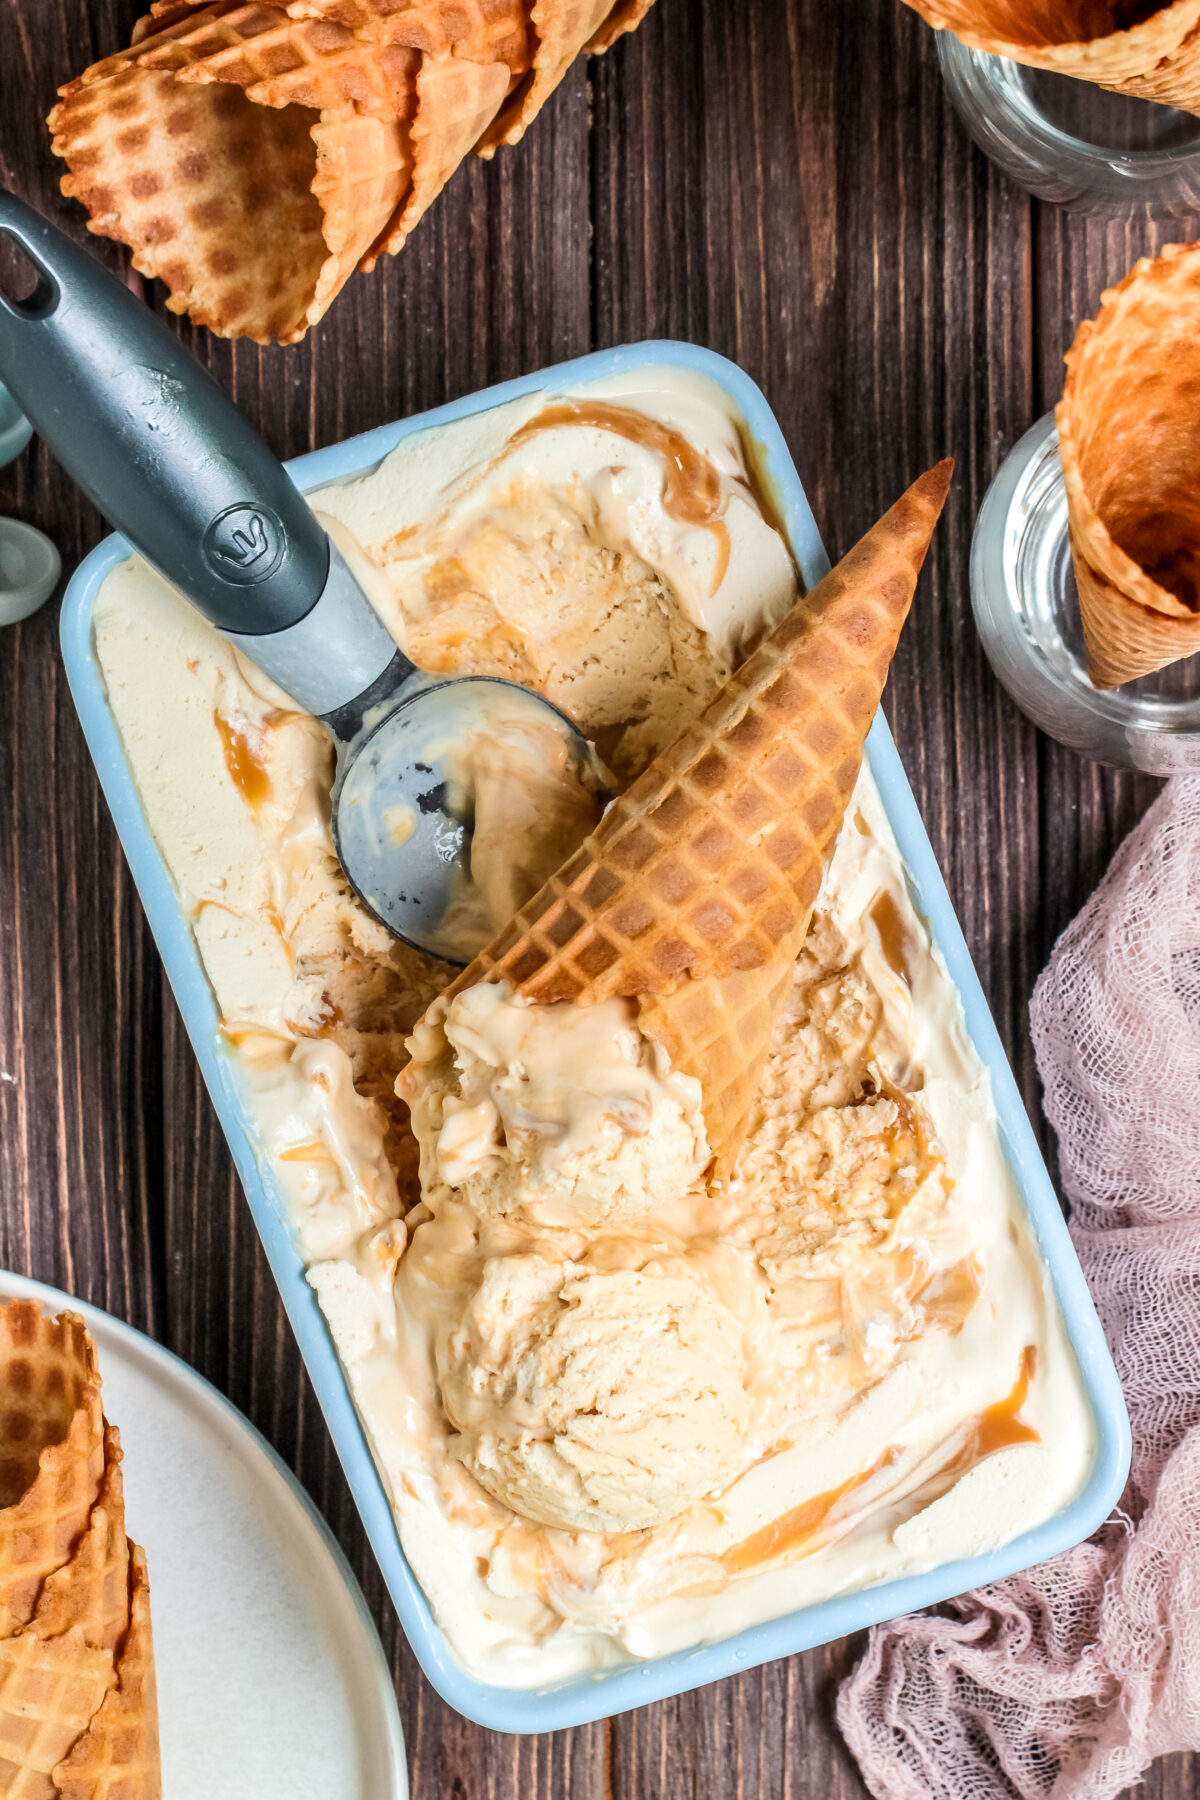 This easy, no-churn dulce de leche ice cream recipe is perfect for summer! It's rich, creamy, and loaded with delicious caramel flavor.